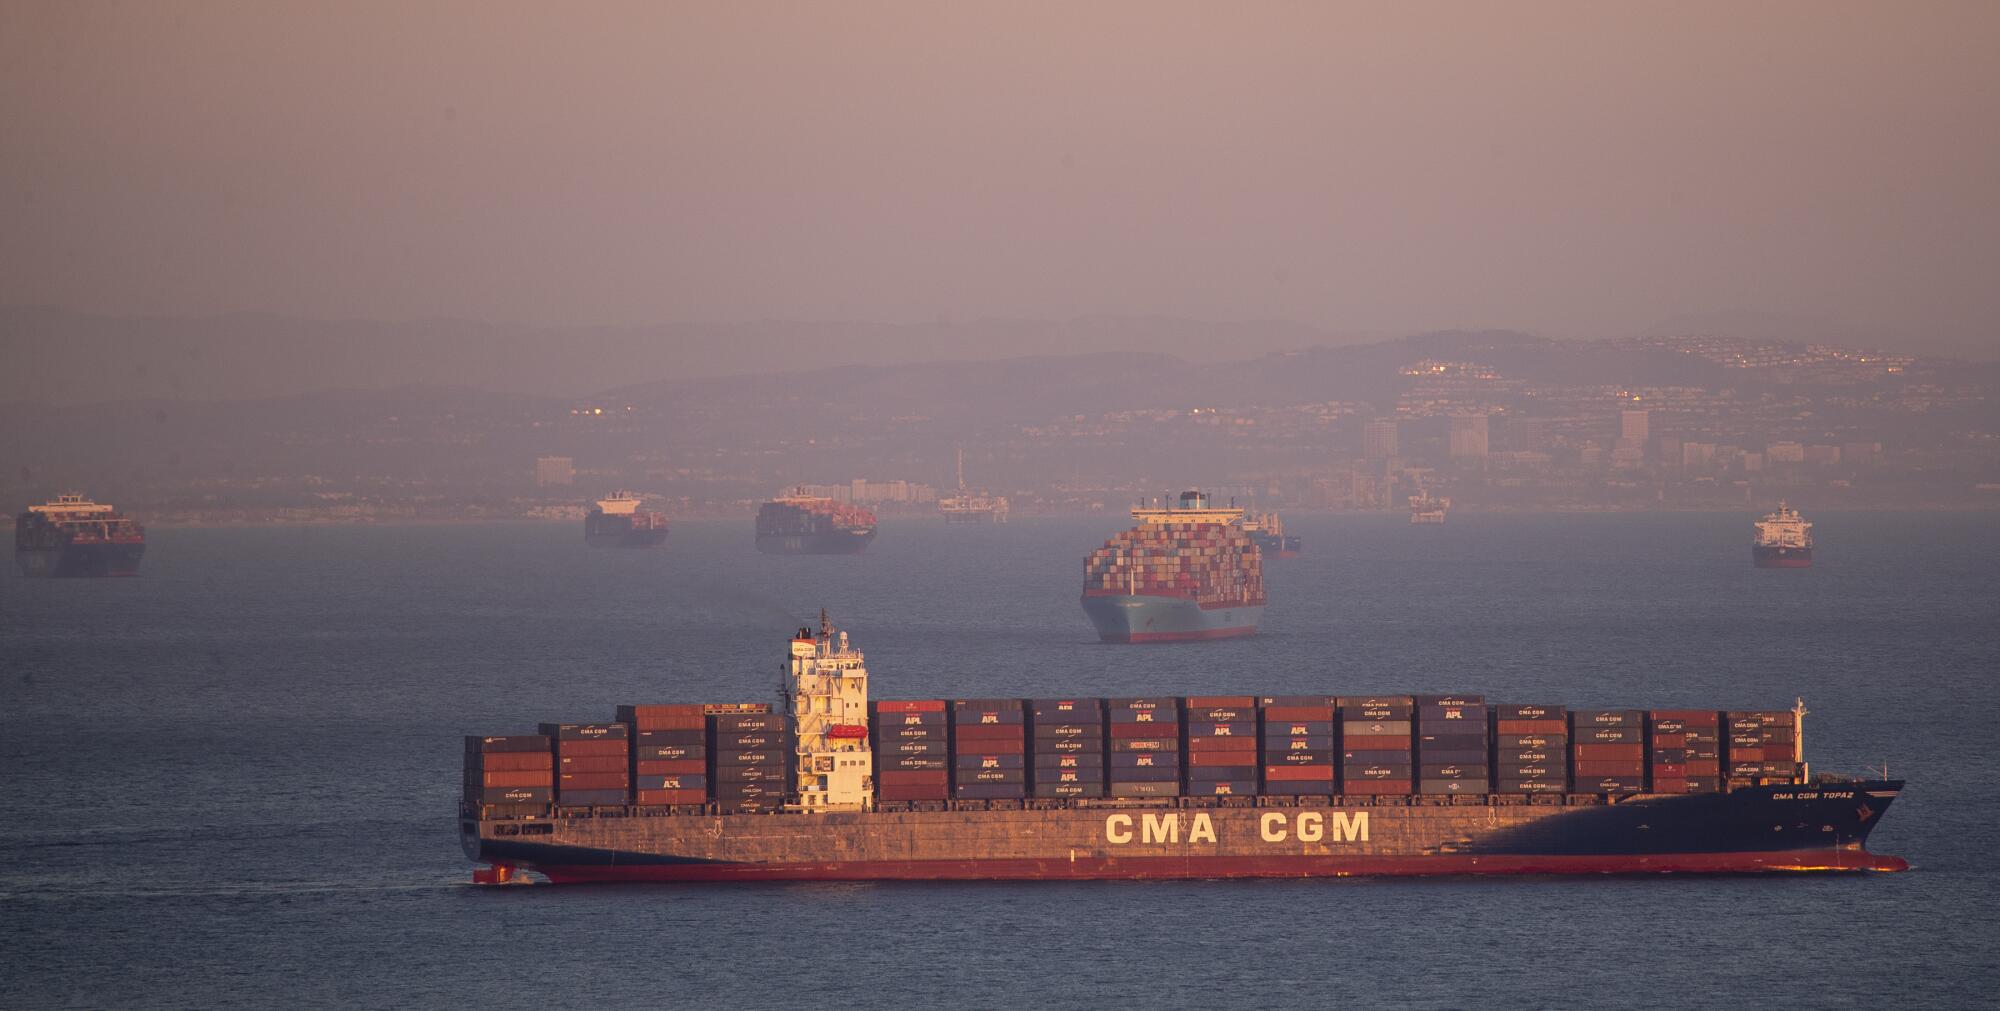 A container ship is seen in the foreground on the water with others in the distance